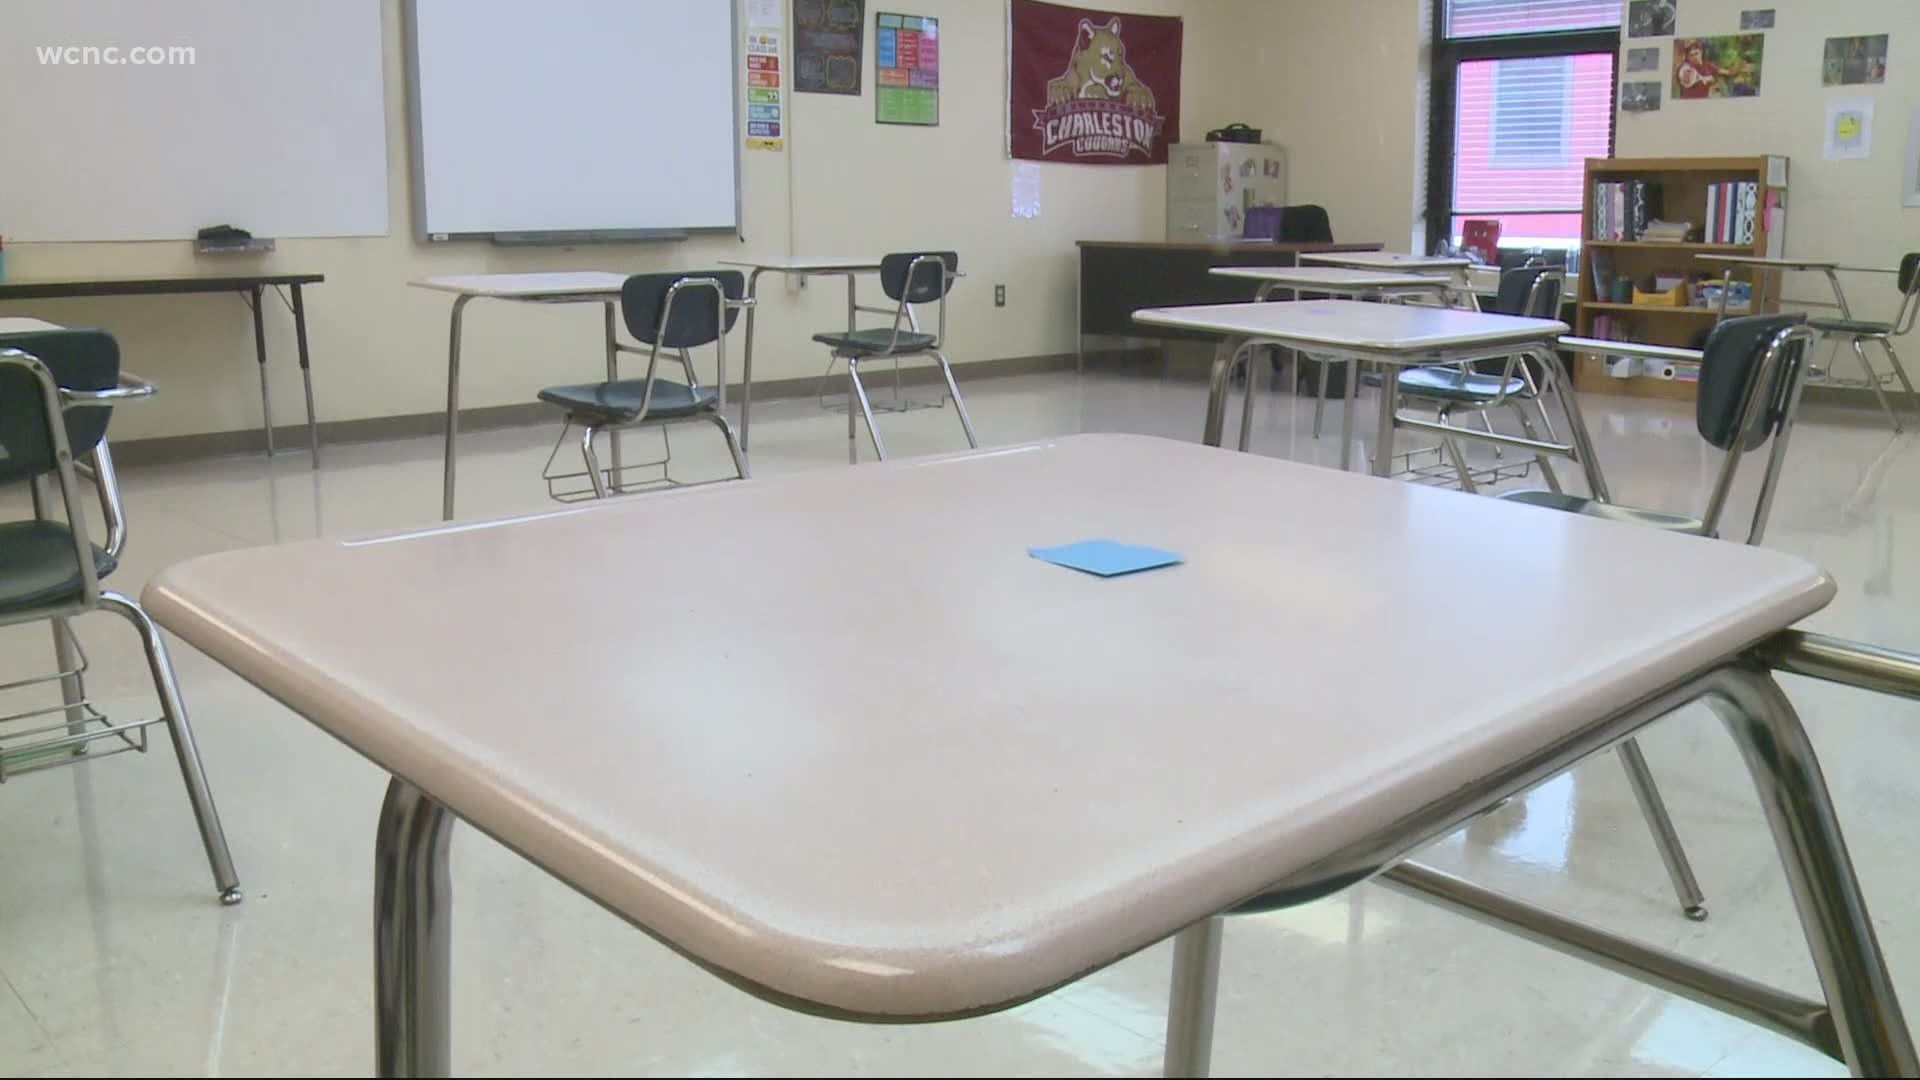 Classrooms are stripped down to the very basics to allow for easy cleaning and social distancing.